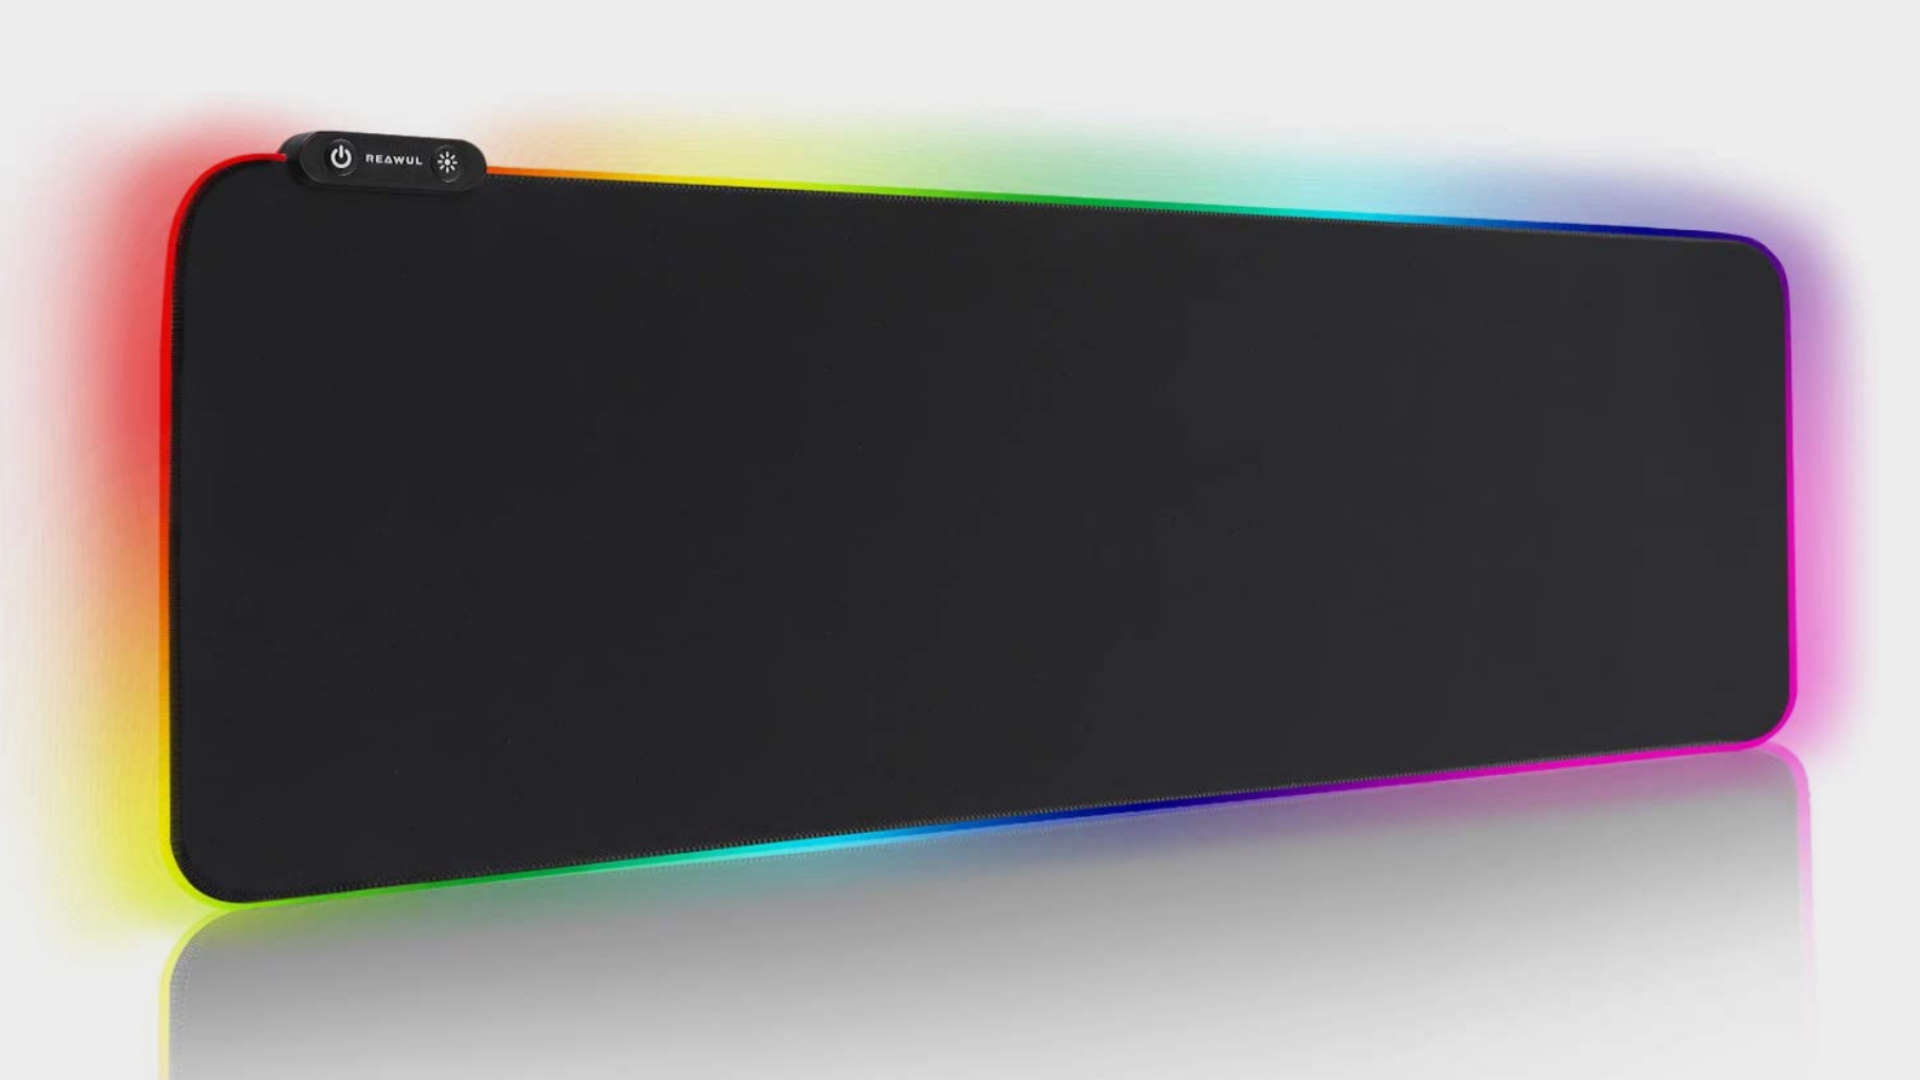 The Reawul RGB Mousepad with RGB LED surround